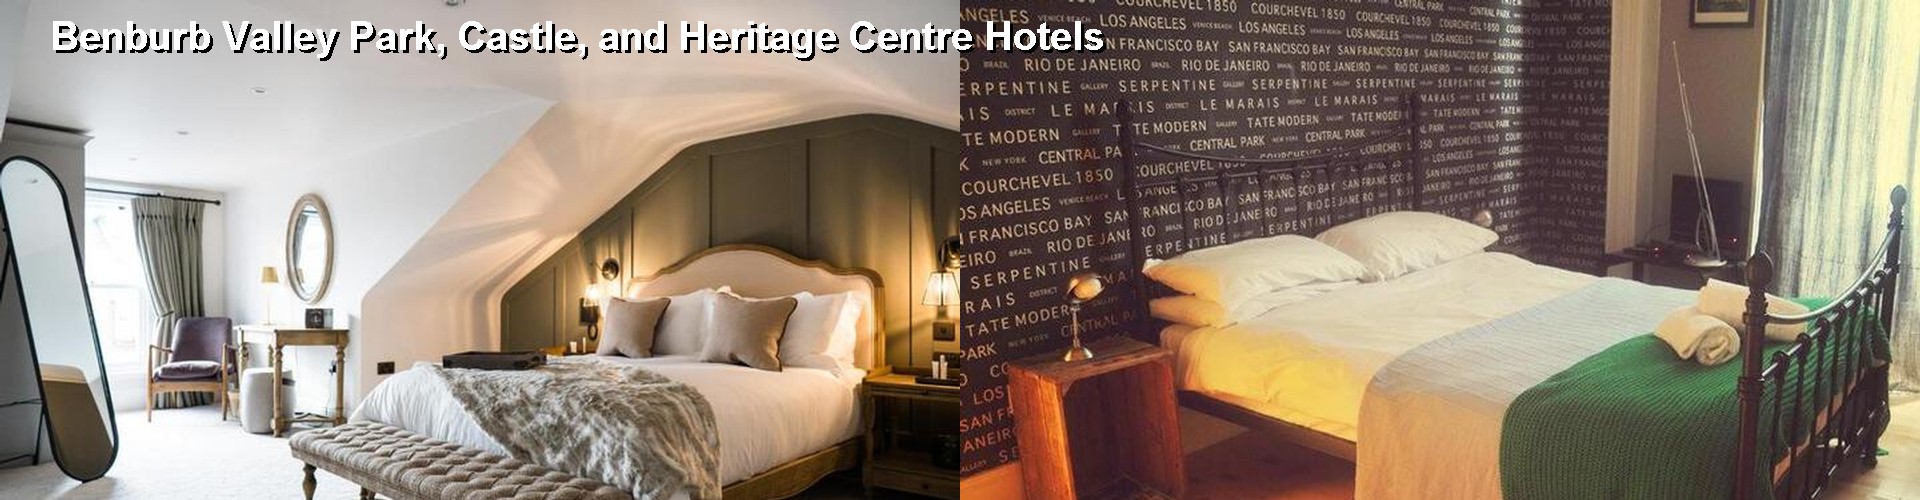 5 Best Hotels near Benburb Valley Park, Castle, and Heritage Centre